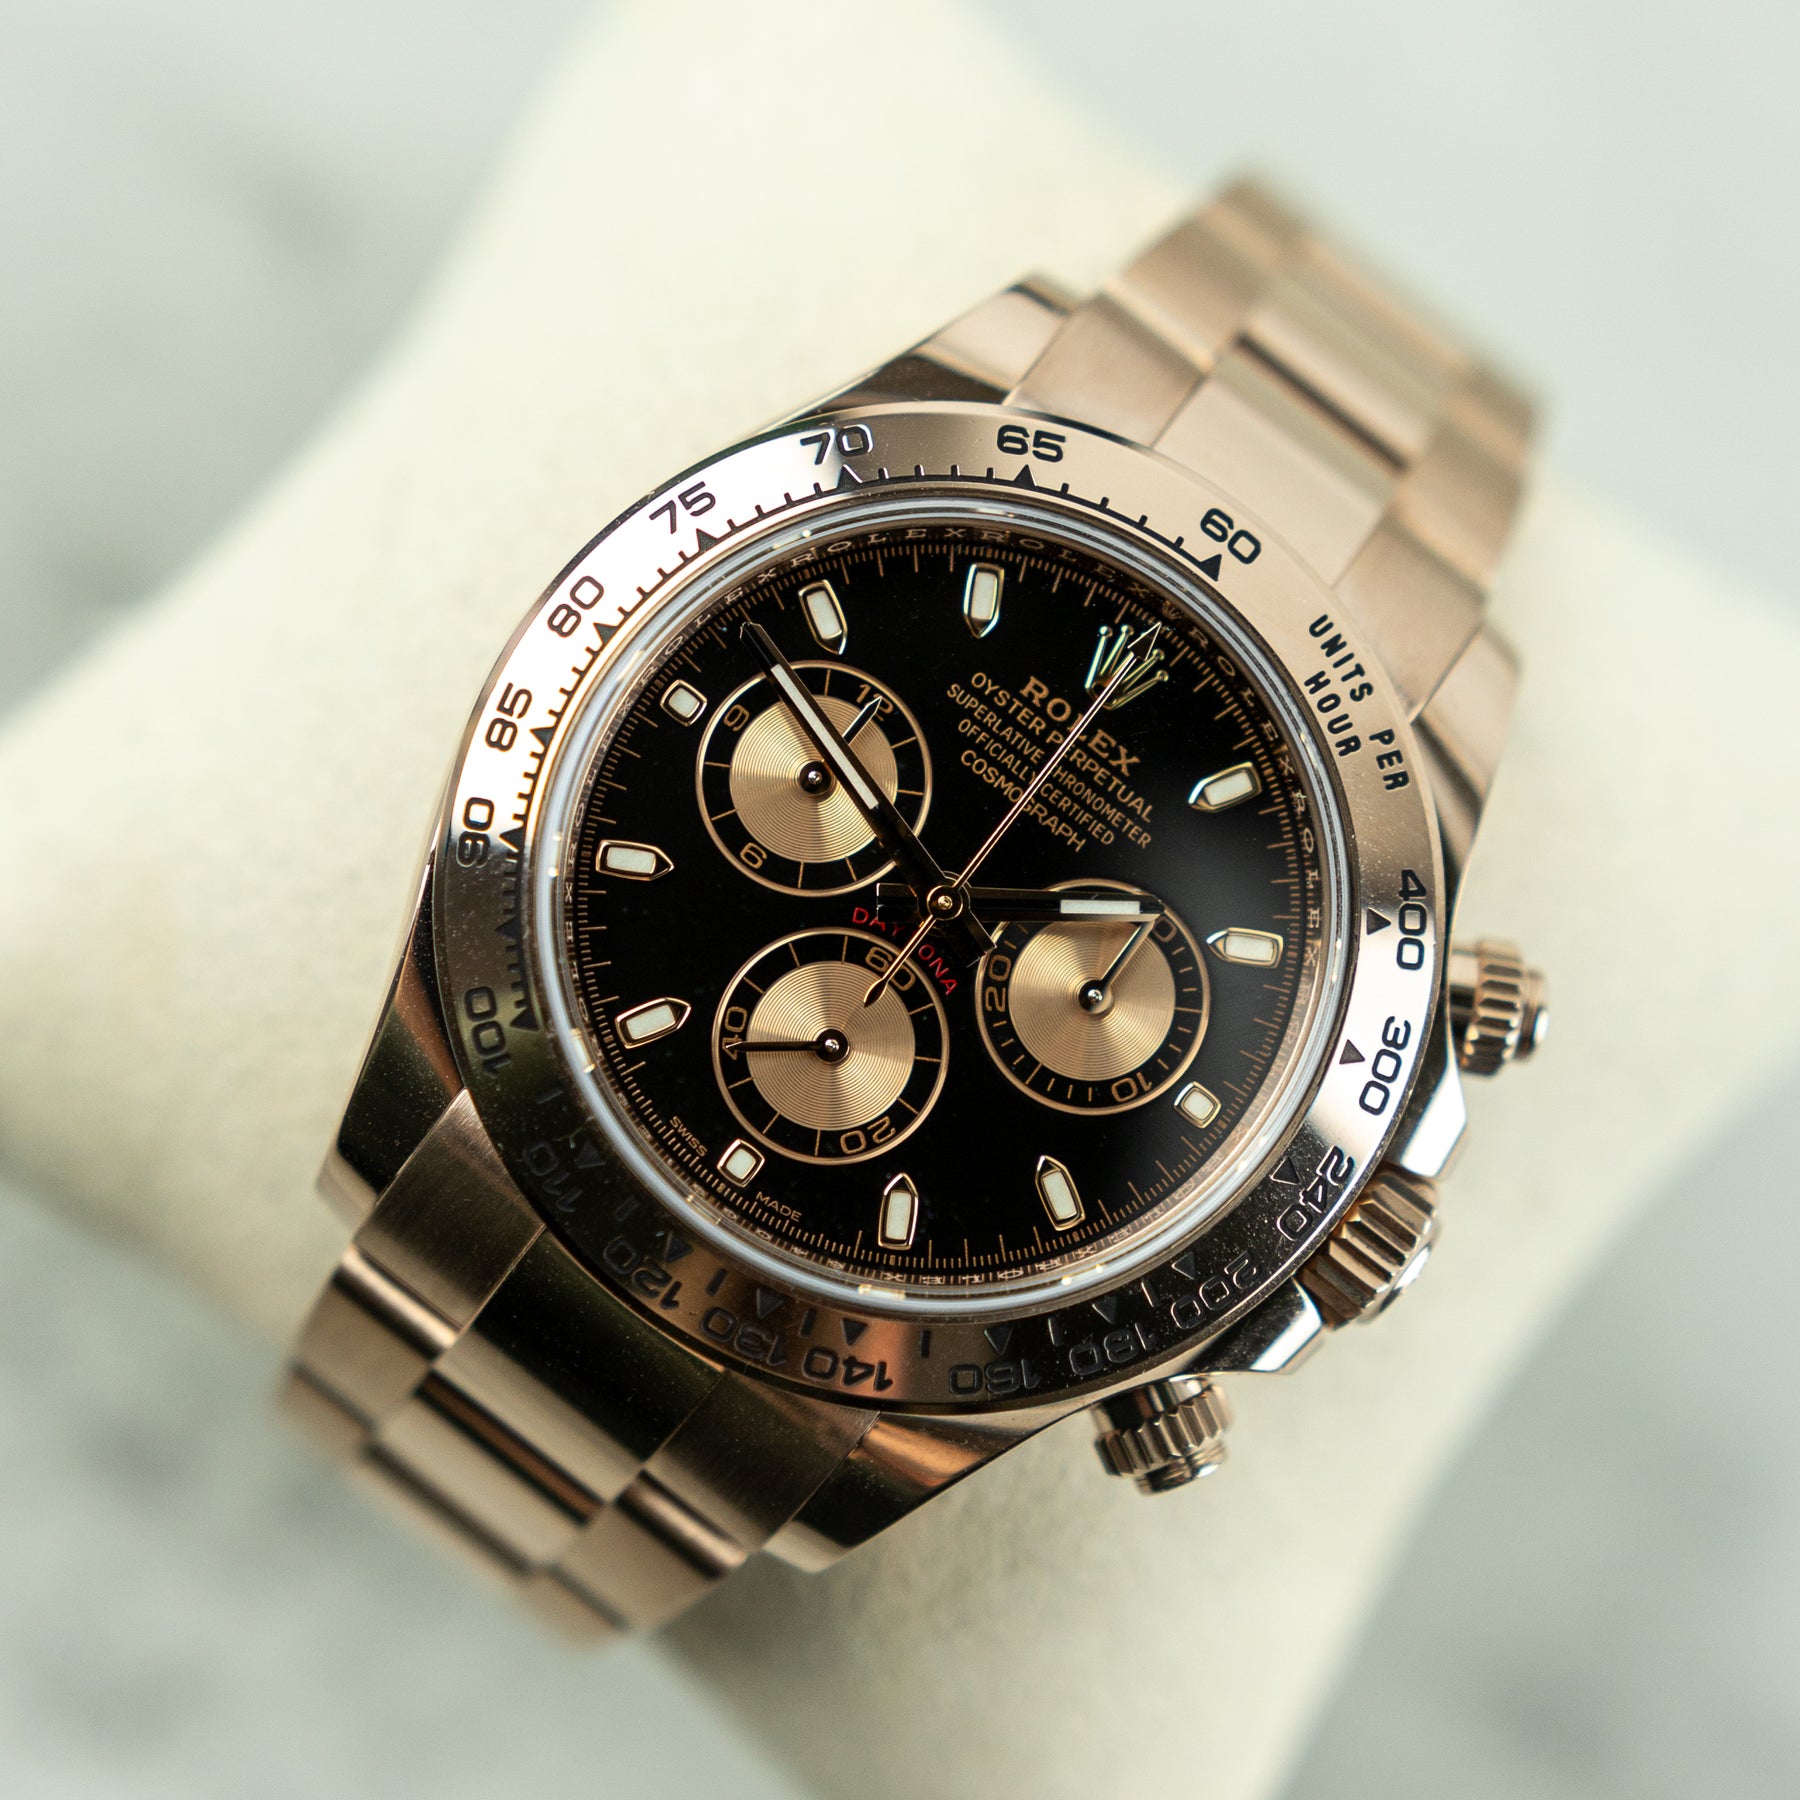 2023 Rolex COSMOGRAPH DAYTONA 18K Everose Gold, Black Dial 116505 Available at RR Jewellers Yarm